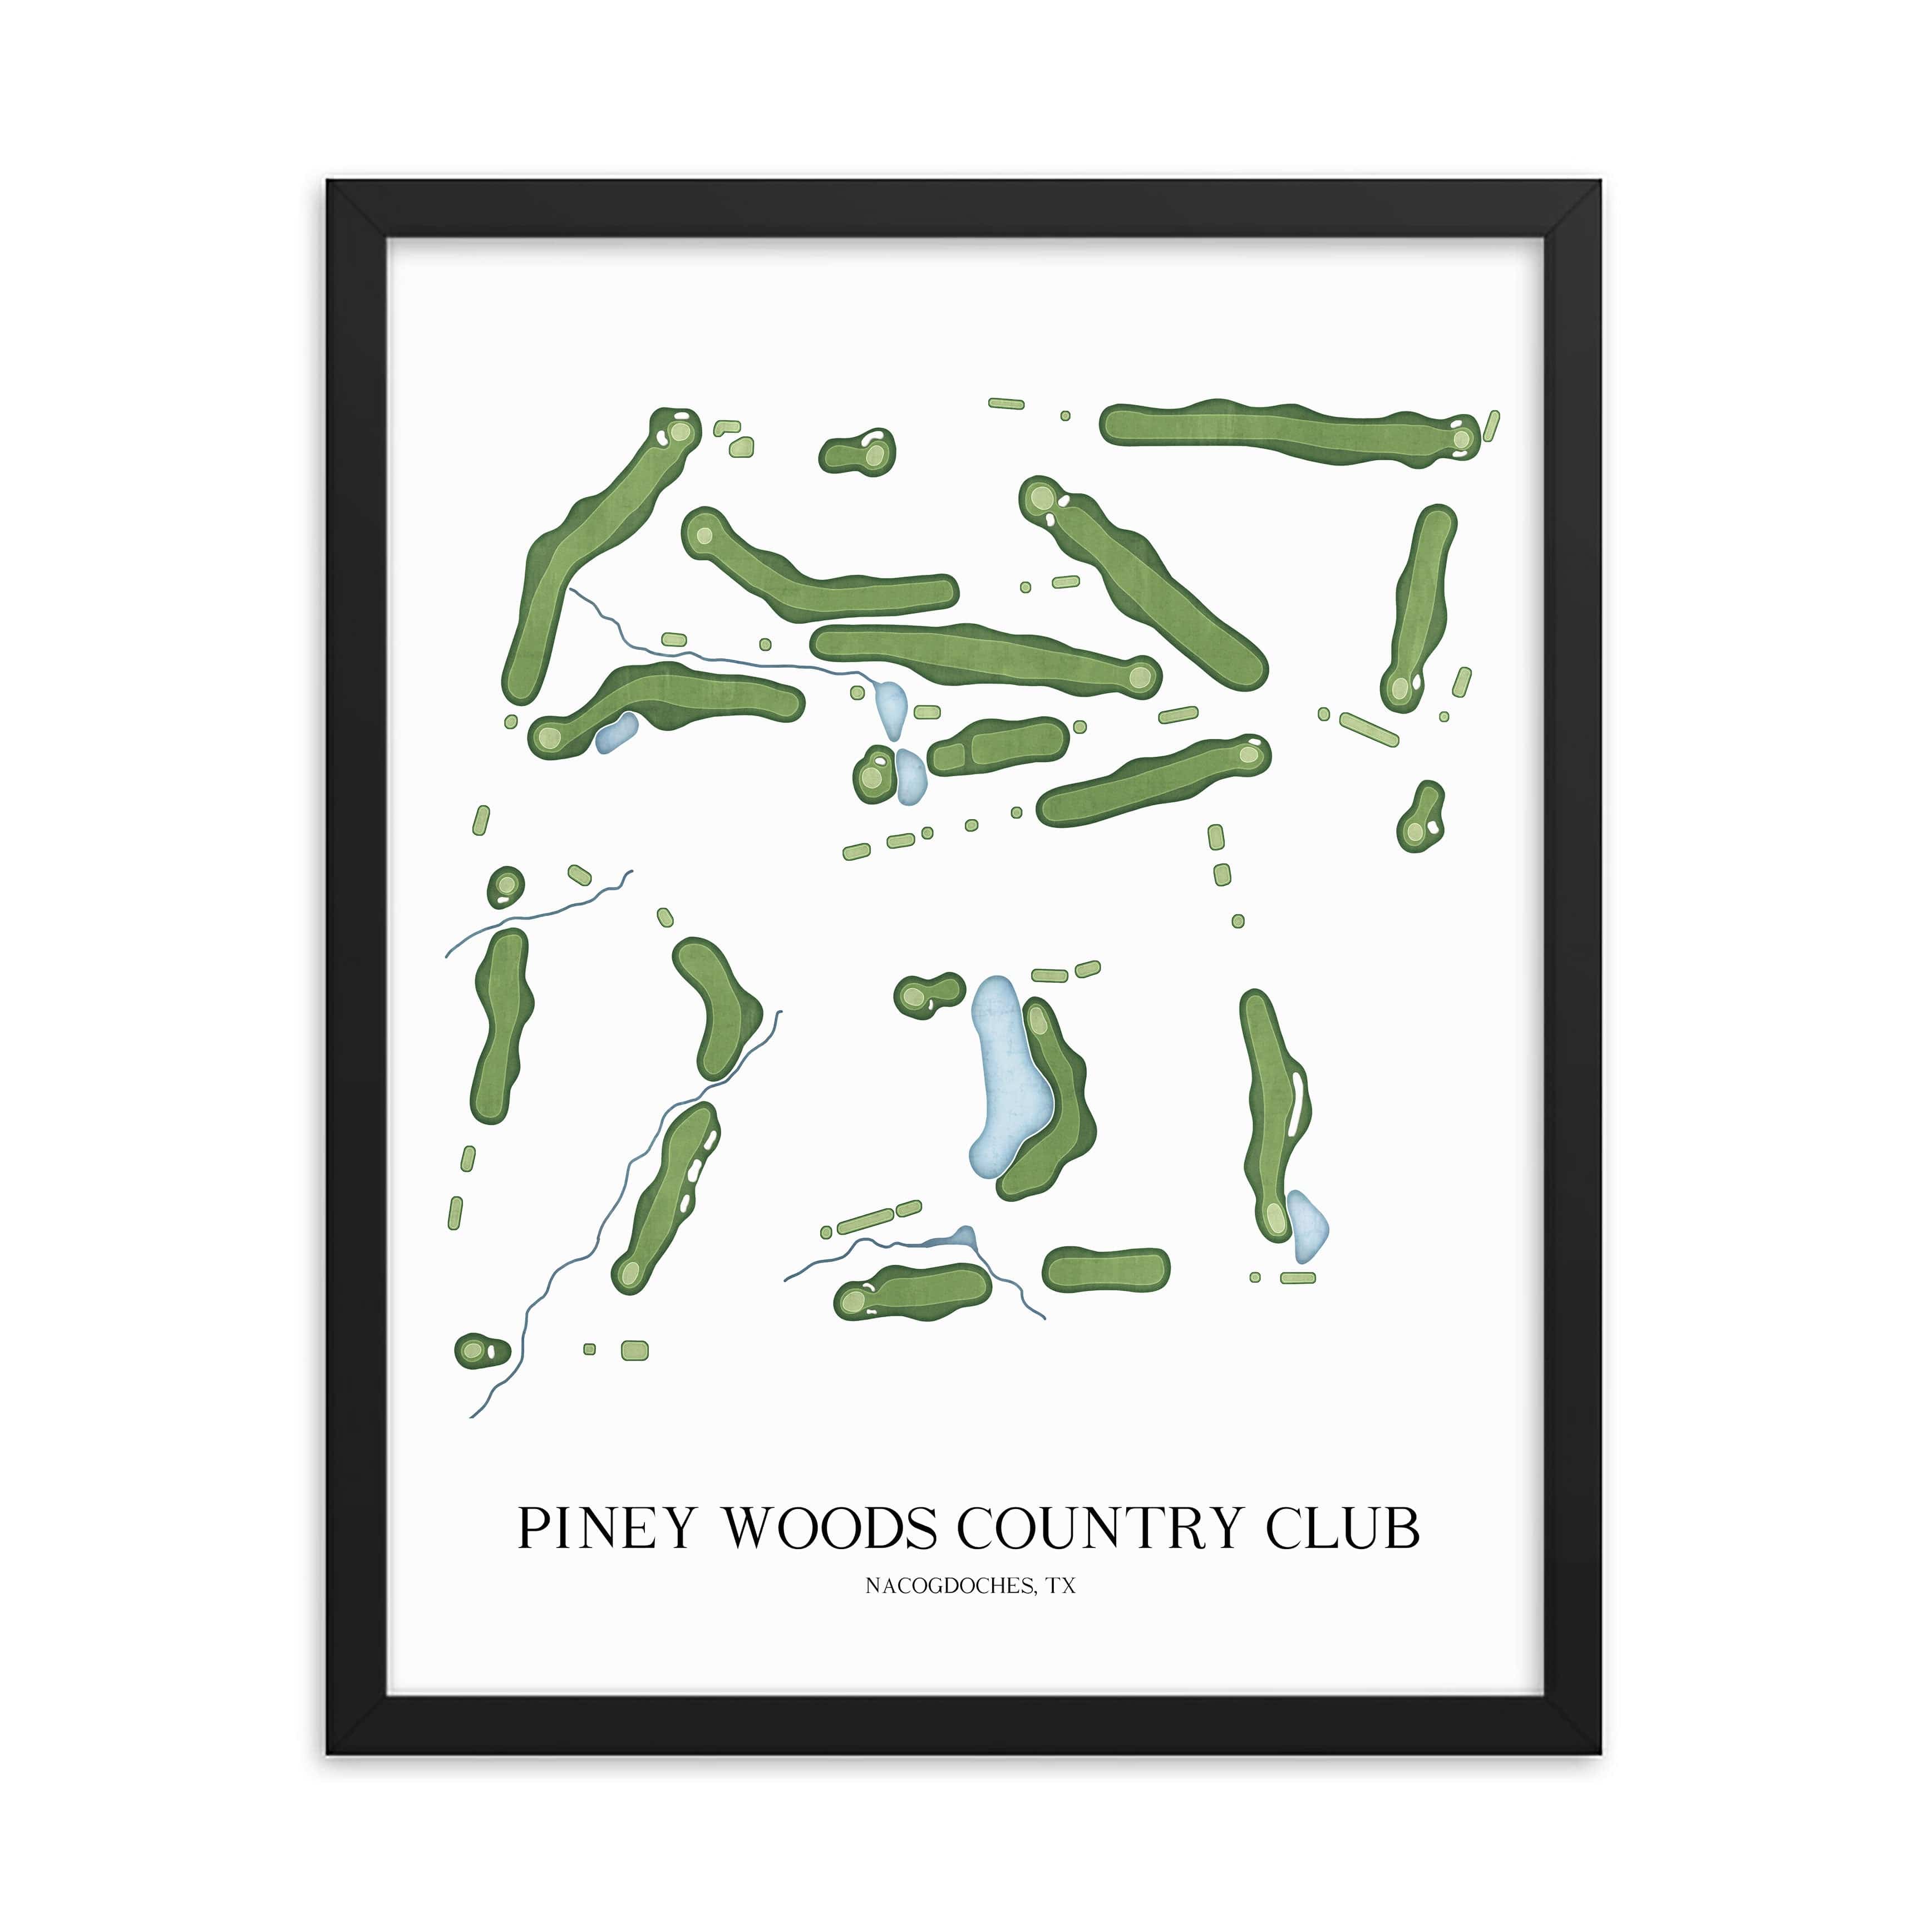 The 19th Hole Golf Shop - Golf Course Prints -  Piney Woods Country Club Golf Course Map